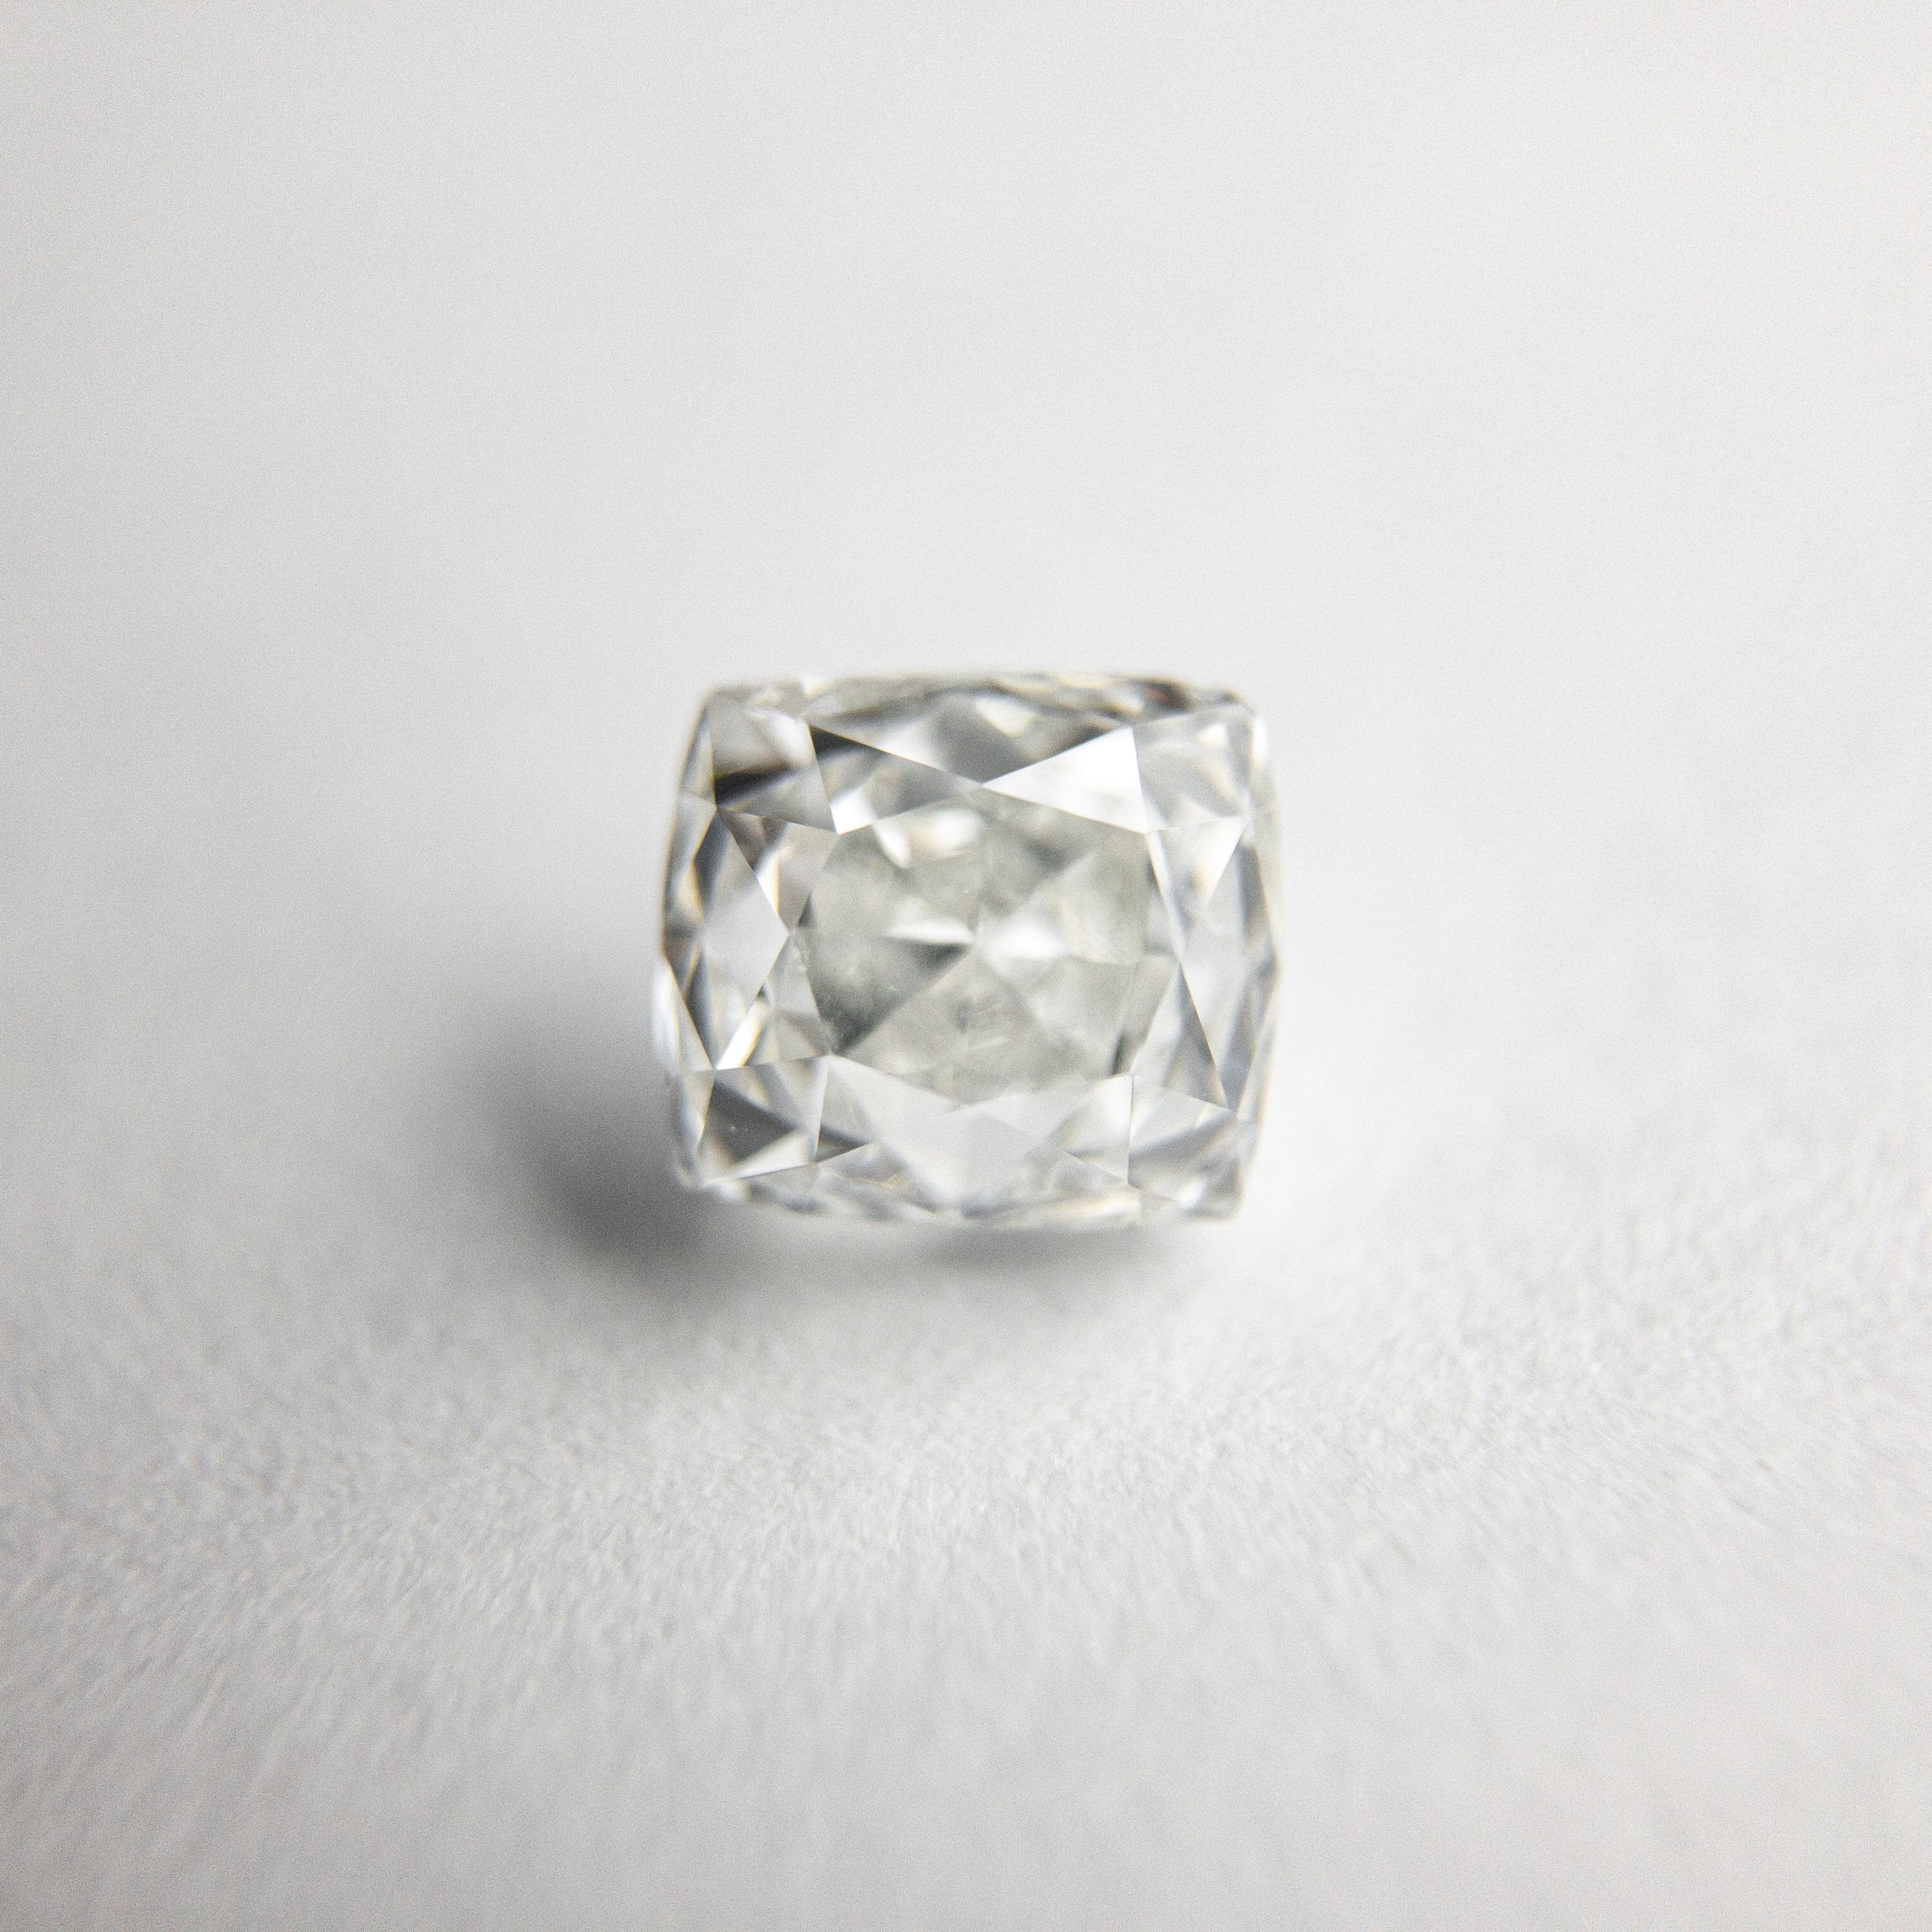 1.05ct 5.38x4.86x4.59mm GIA I1 G Antique French Cut 18390-01 HOLD D1583